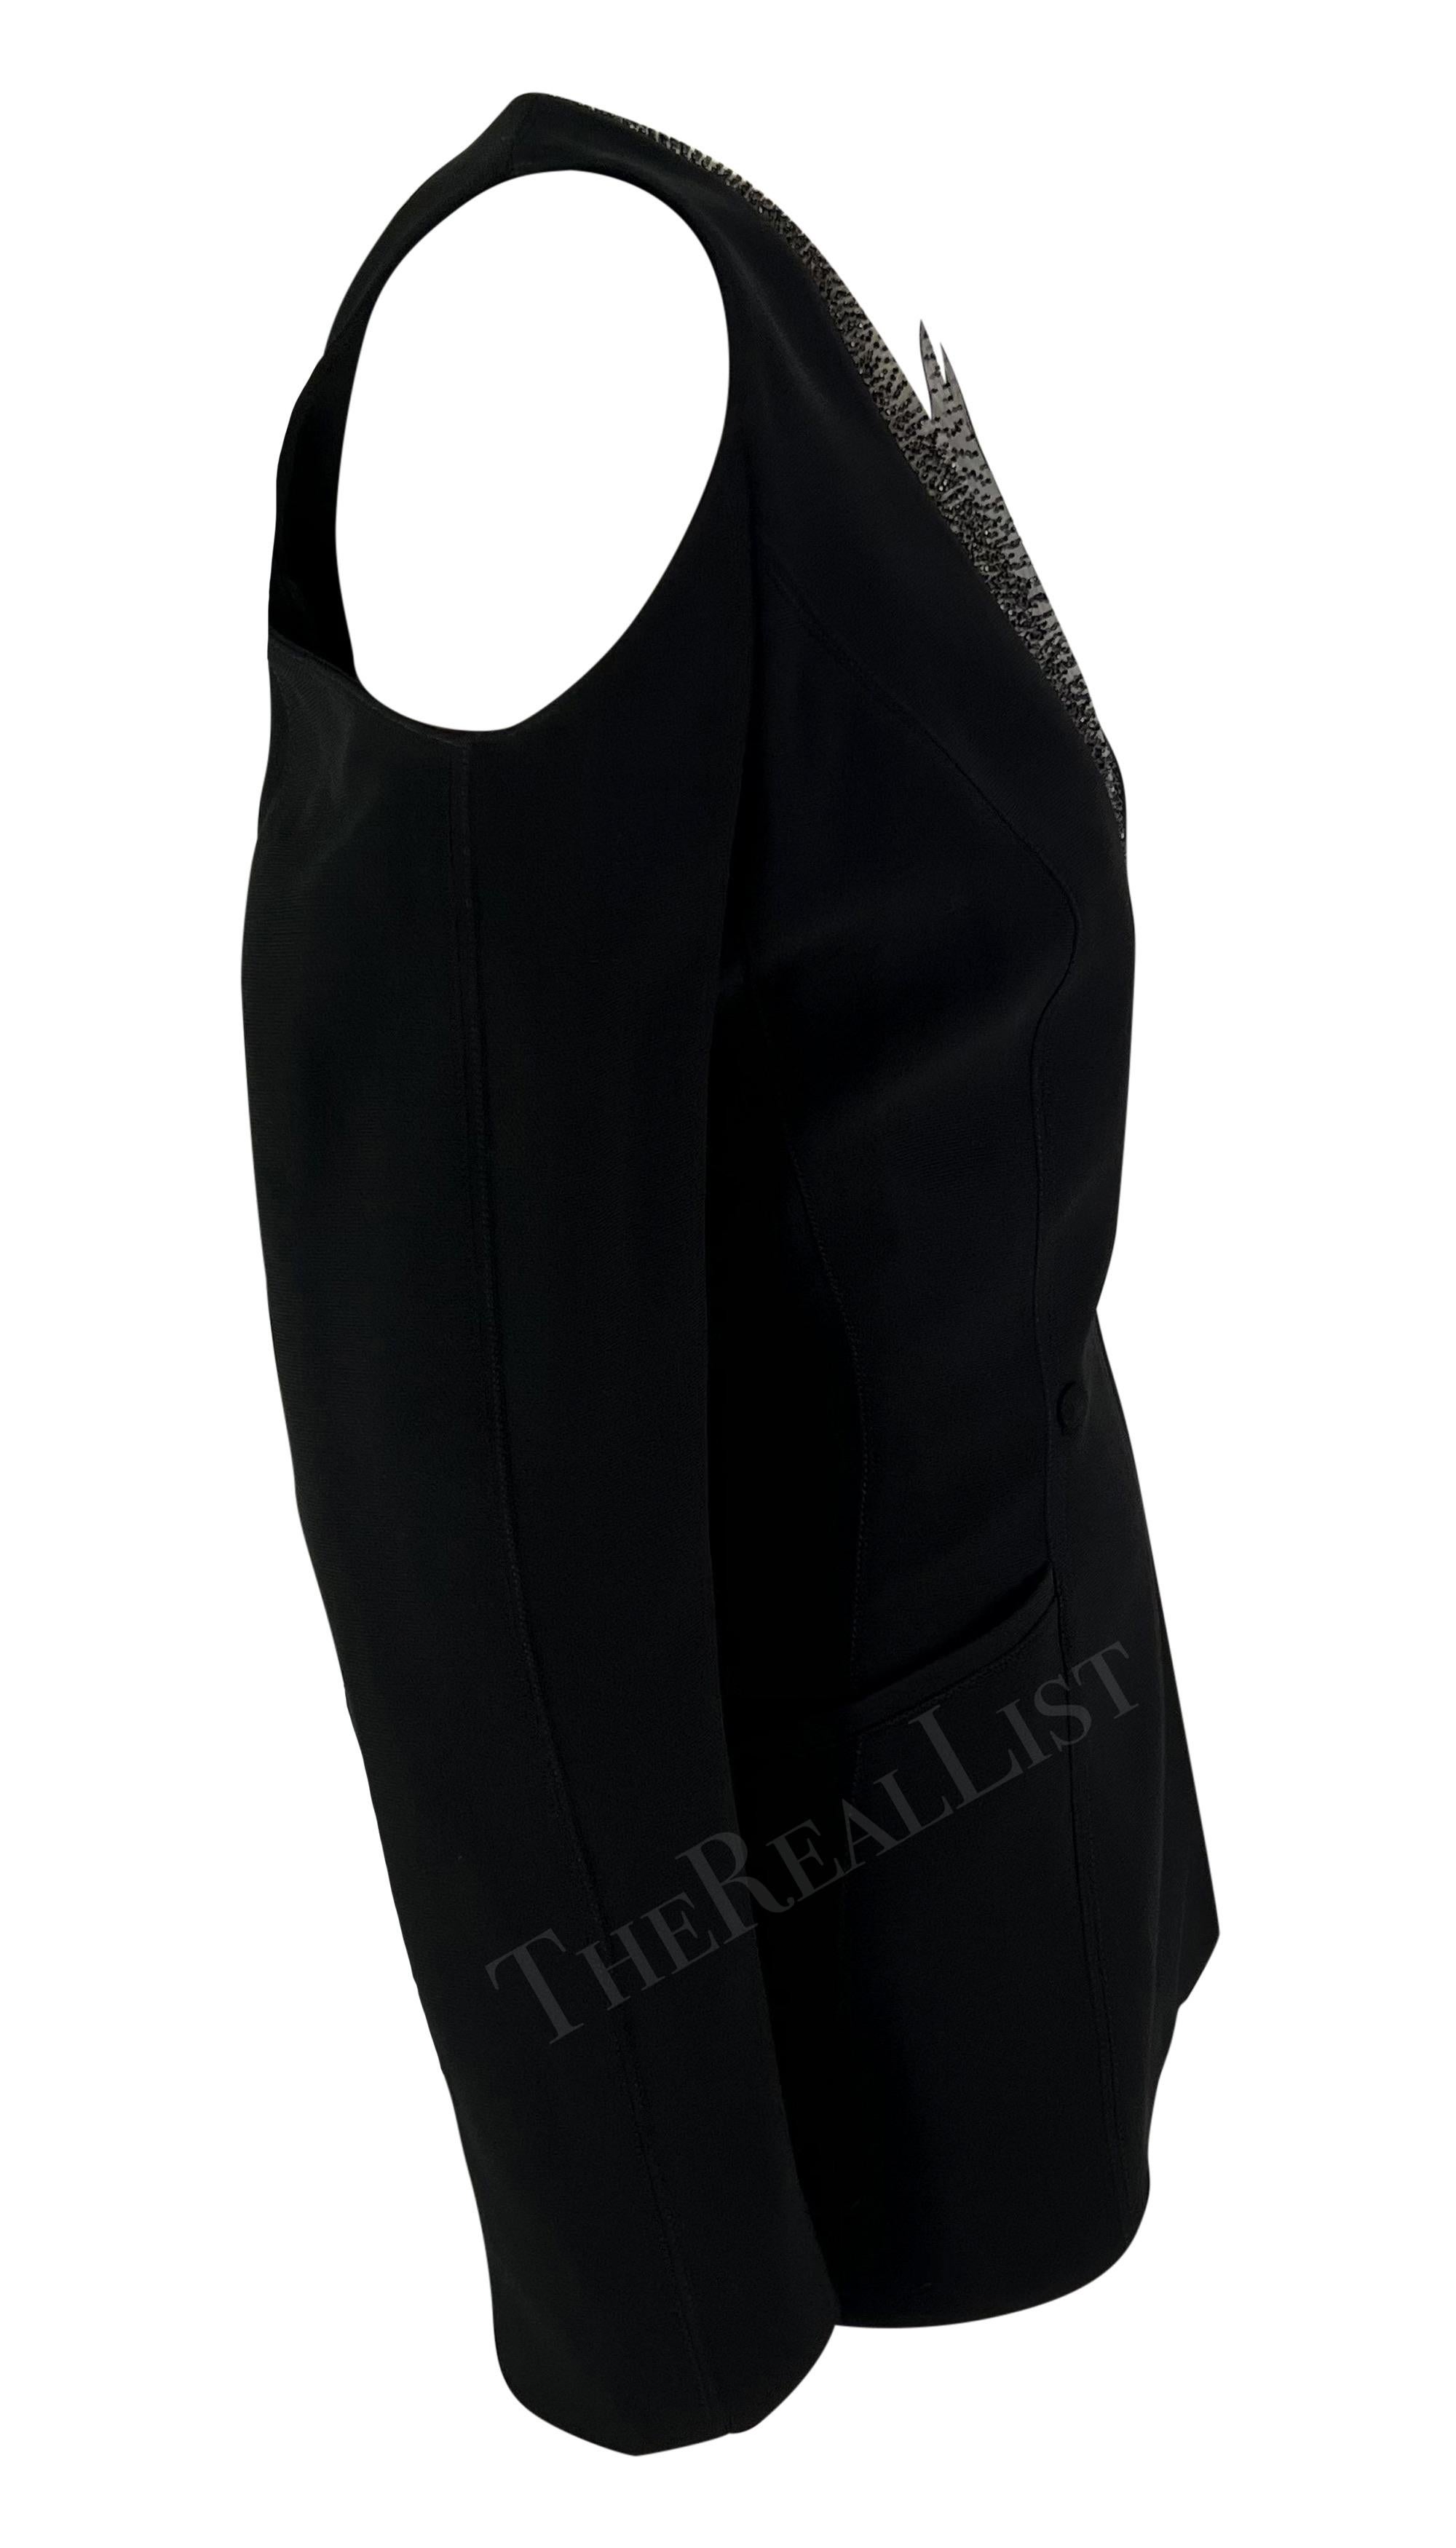 S/S 2001 Thierry Mugler Runway Beaded PVC Cutout Black Plunging Blazer For Sale 4